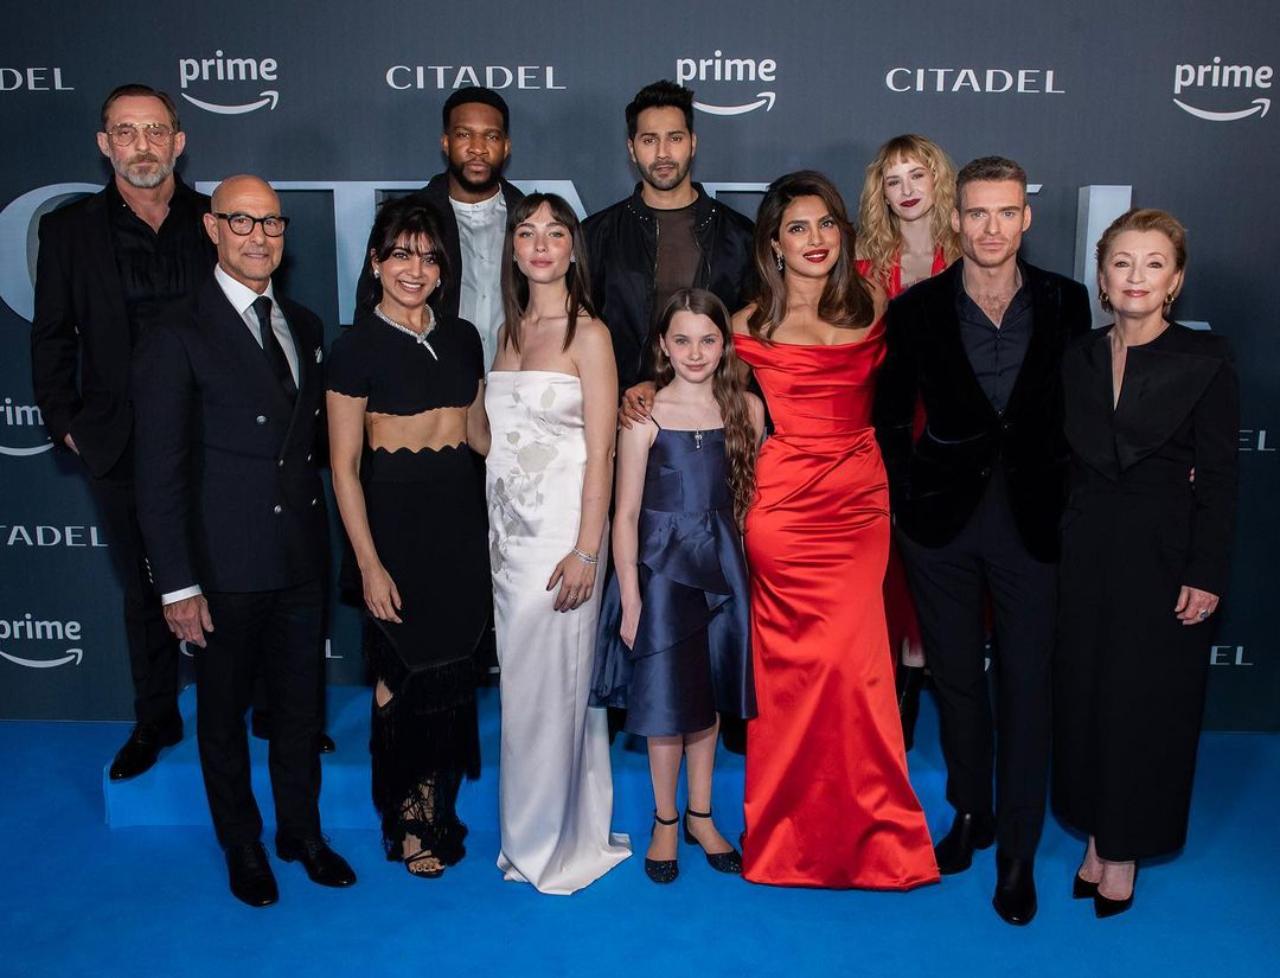 Indian actors Samantha Ruth Prabhu and Varun Dhawan along with filmmmakers Raj and Dk were also at the world premiere. The four are currently working on the Indian version of Citadel